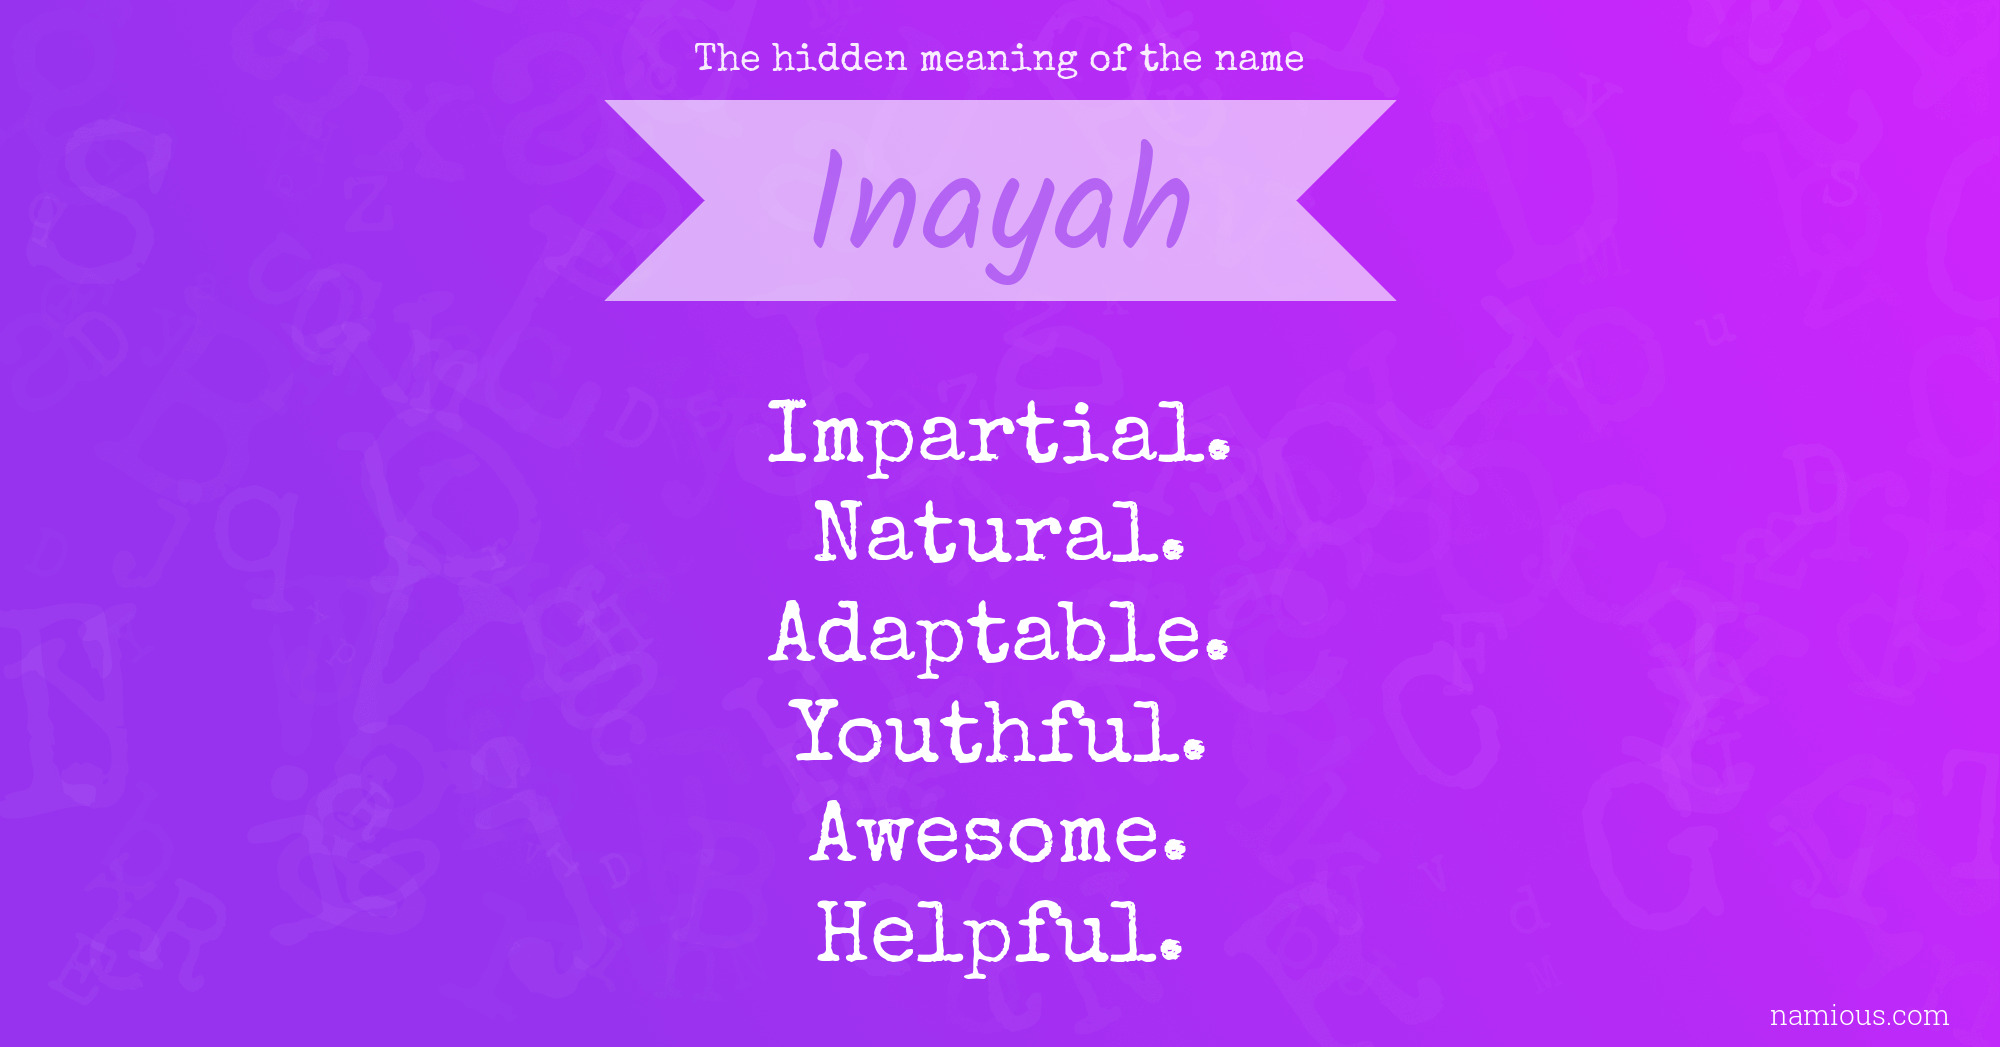 The hidden meaning of the name Inayah